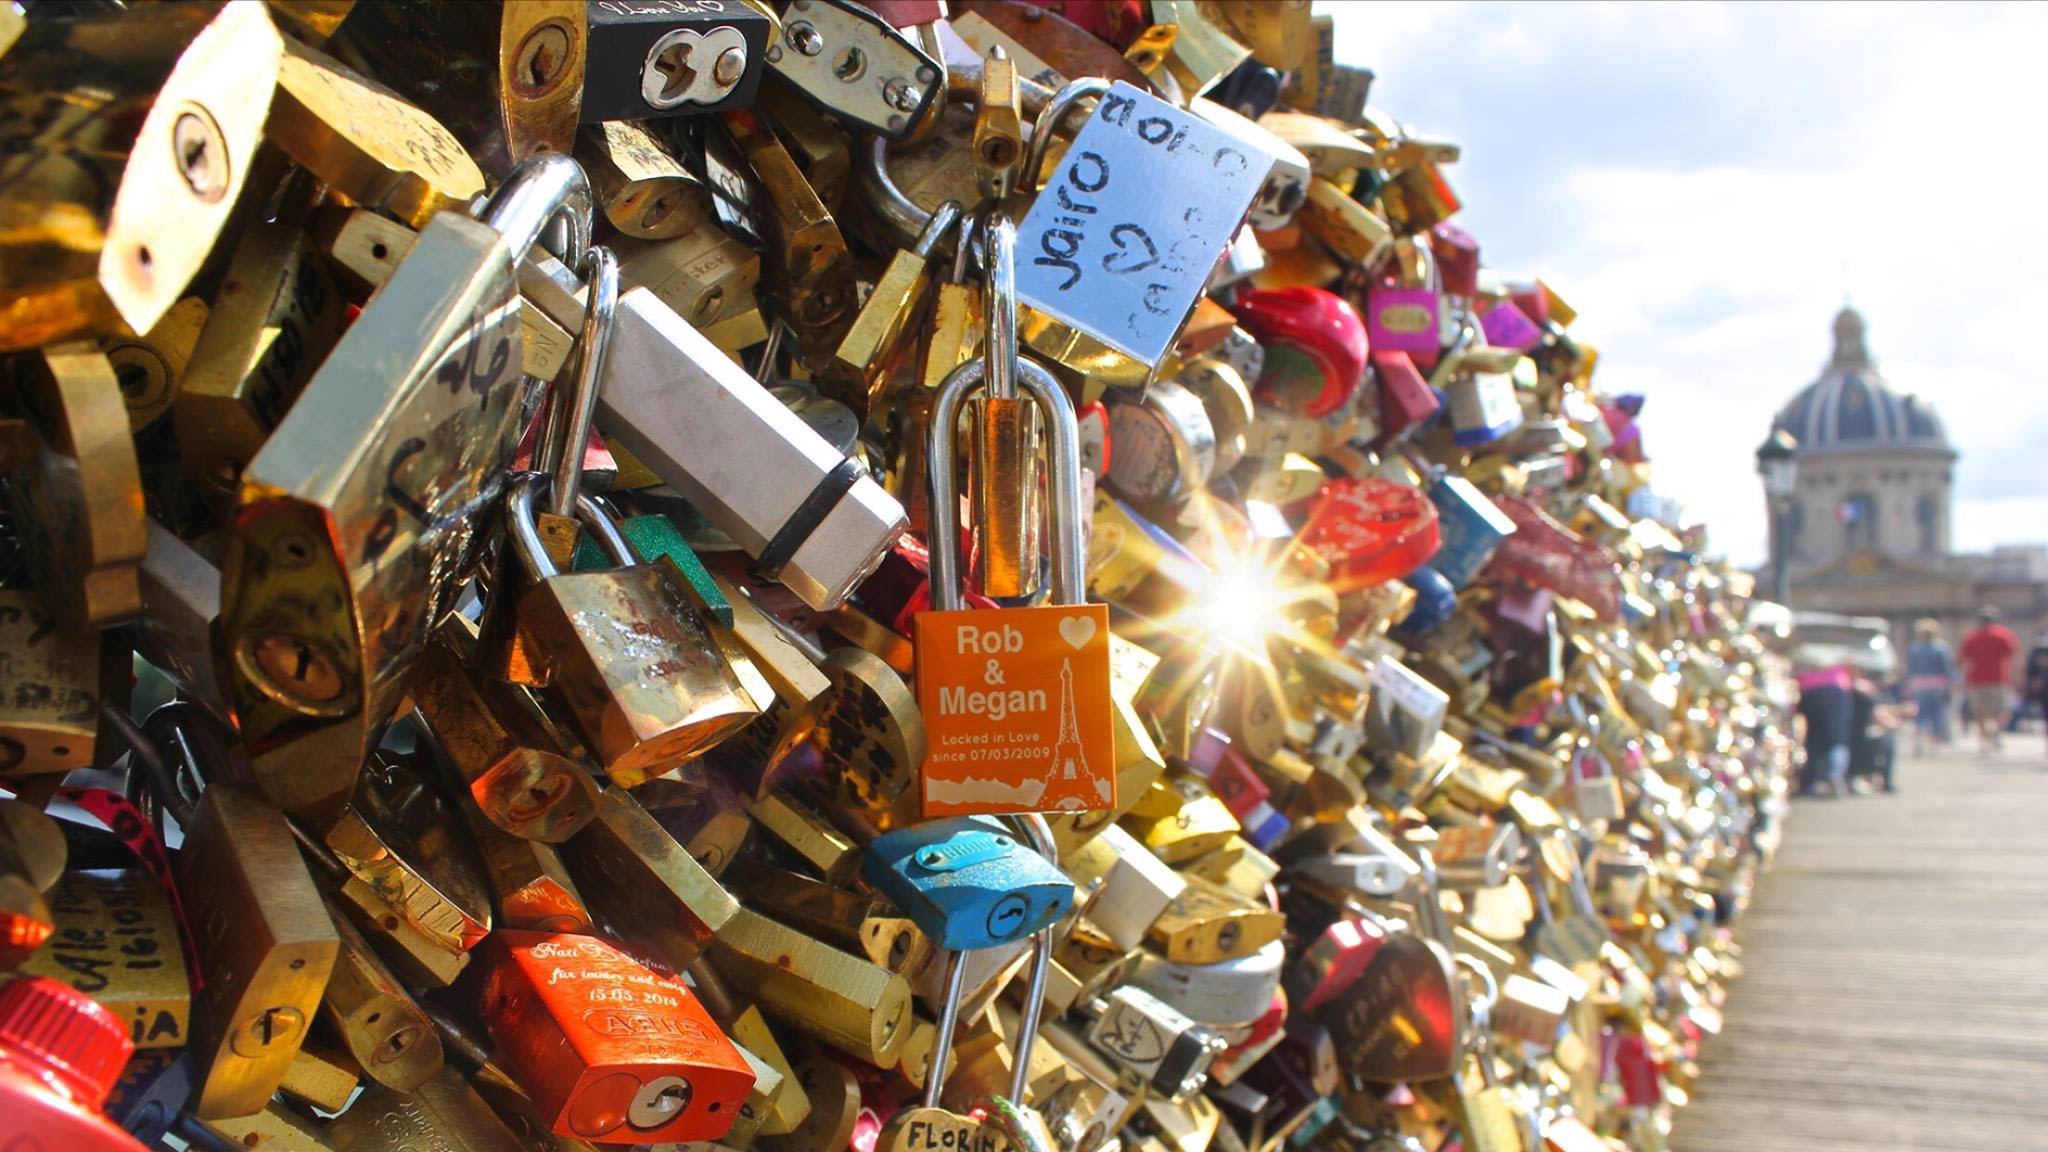 The Story of Love Lock Bridge and Other Bridges in Paris – The Tour Guy